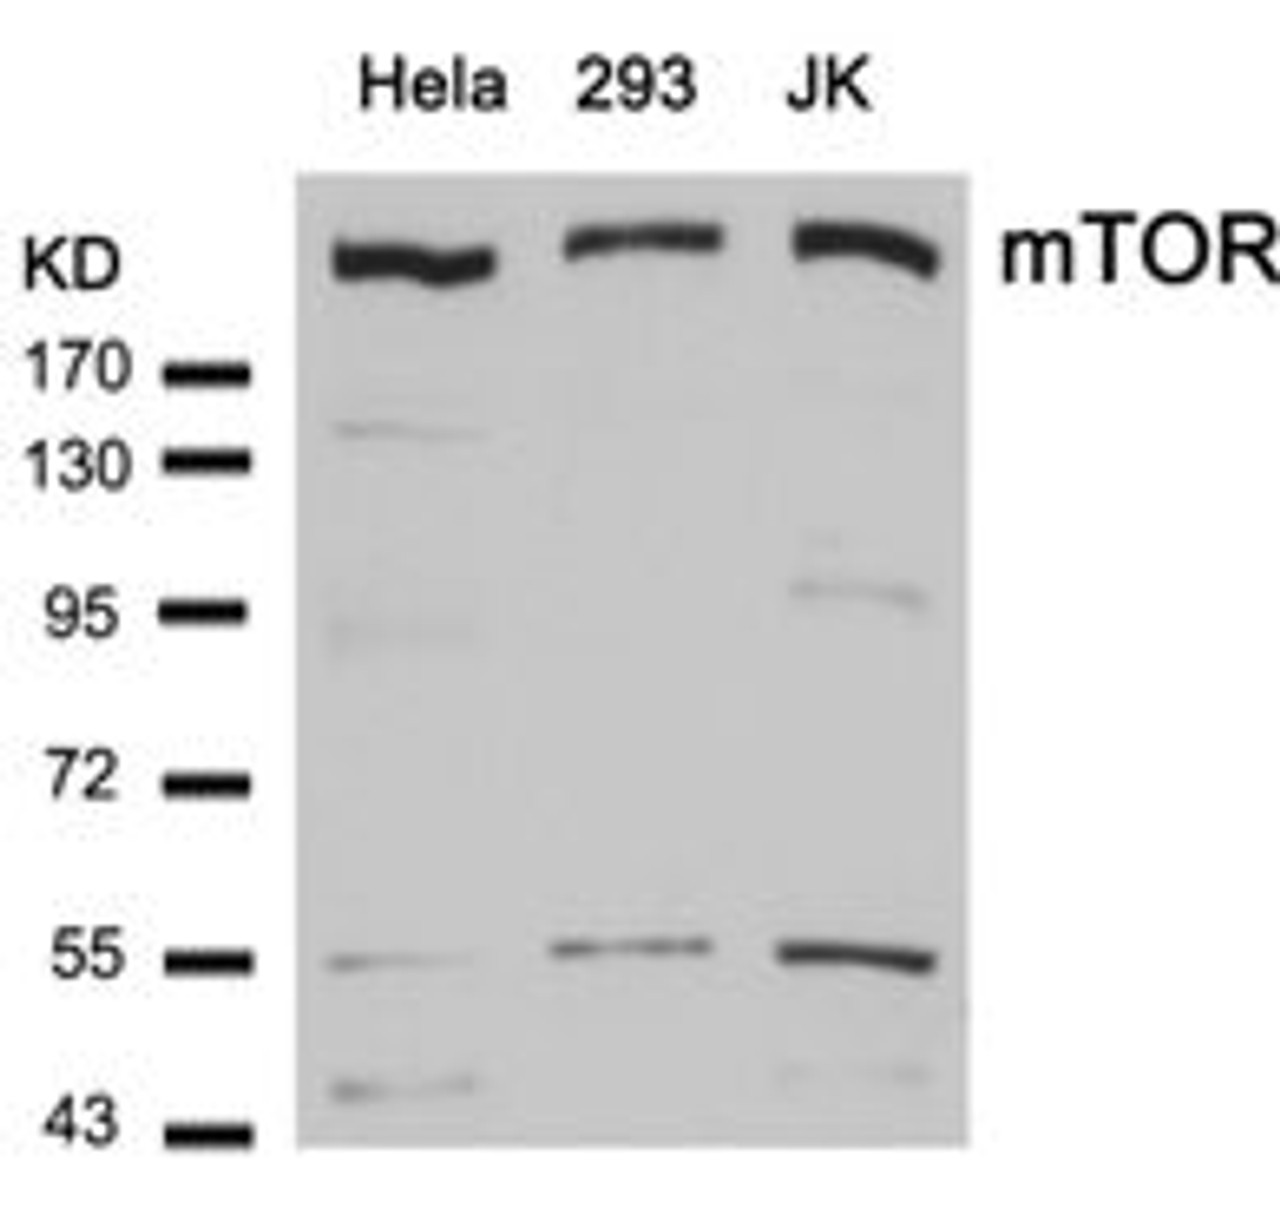 Western blot analysis of lysed extracts from HeLa, 293 and JK cells using mTOR (Ab-2448) .